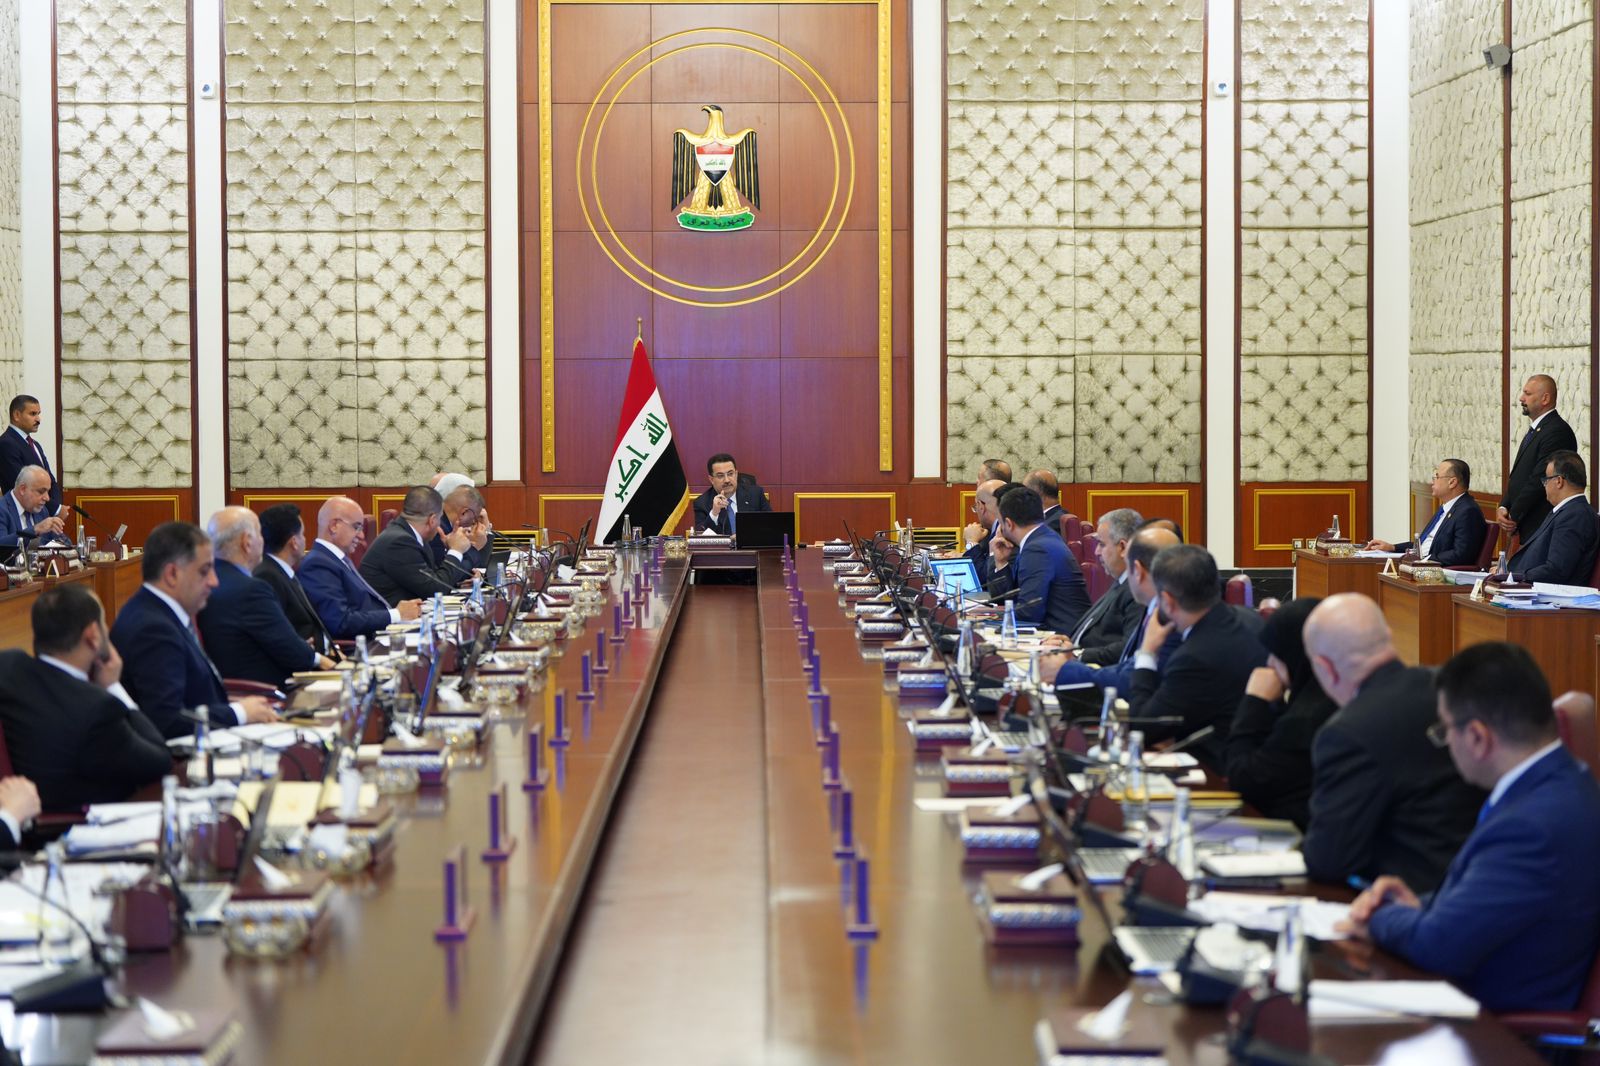 Iraqi Prime Minister Chairs 34th Council of Ministers Session, Addresses Key Reforms